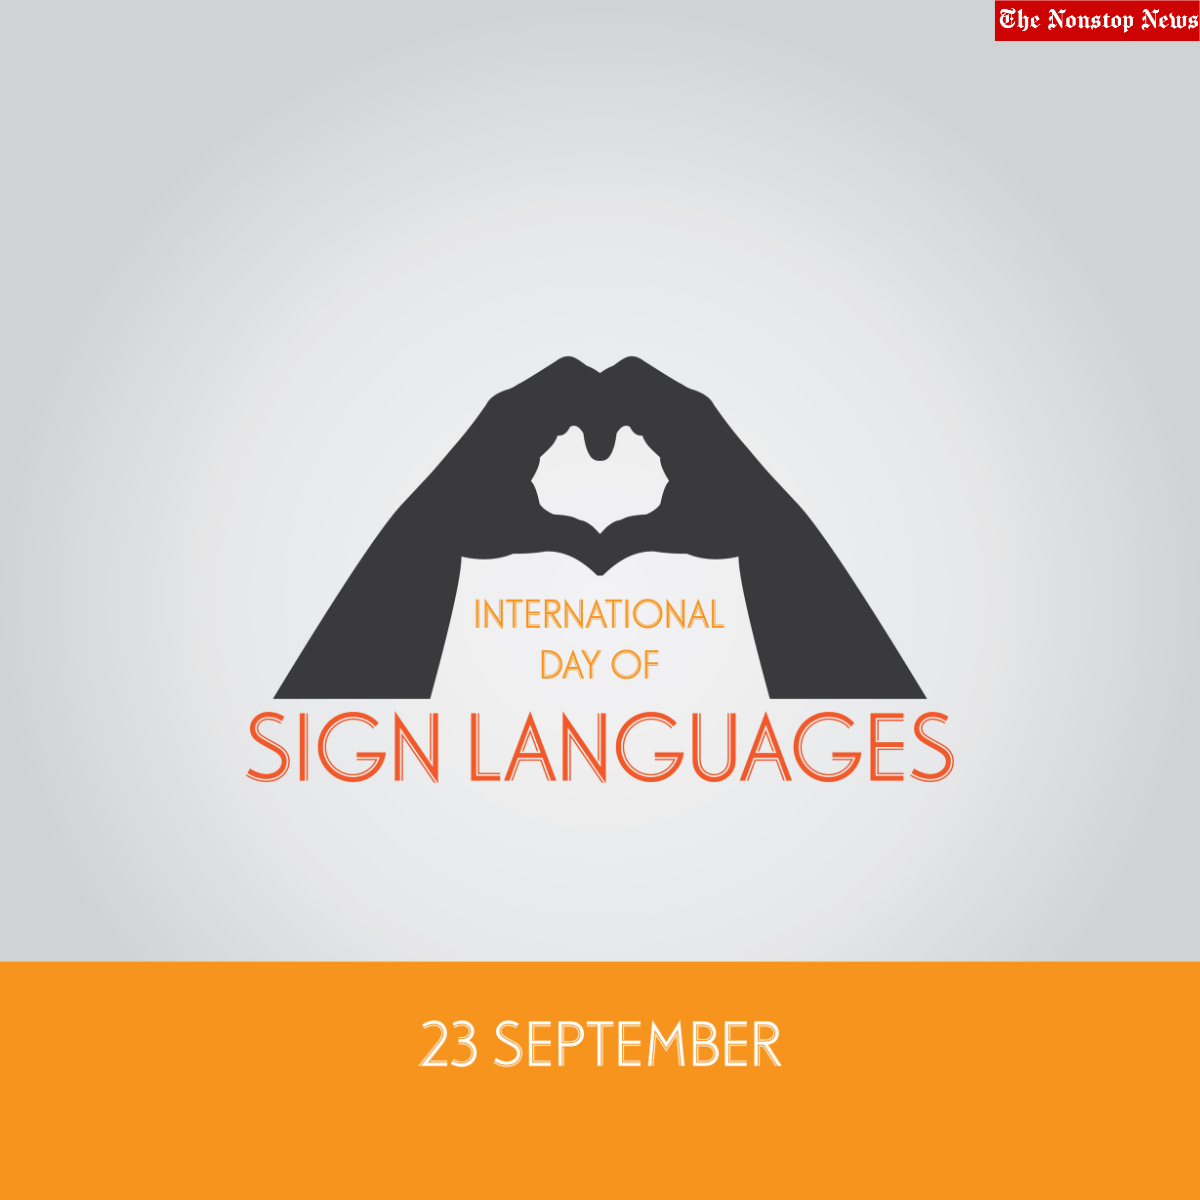 International Day of Sign Languages 2022 Quotes, Posters, Images, Wishes, Messages, and Greetings to share